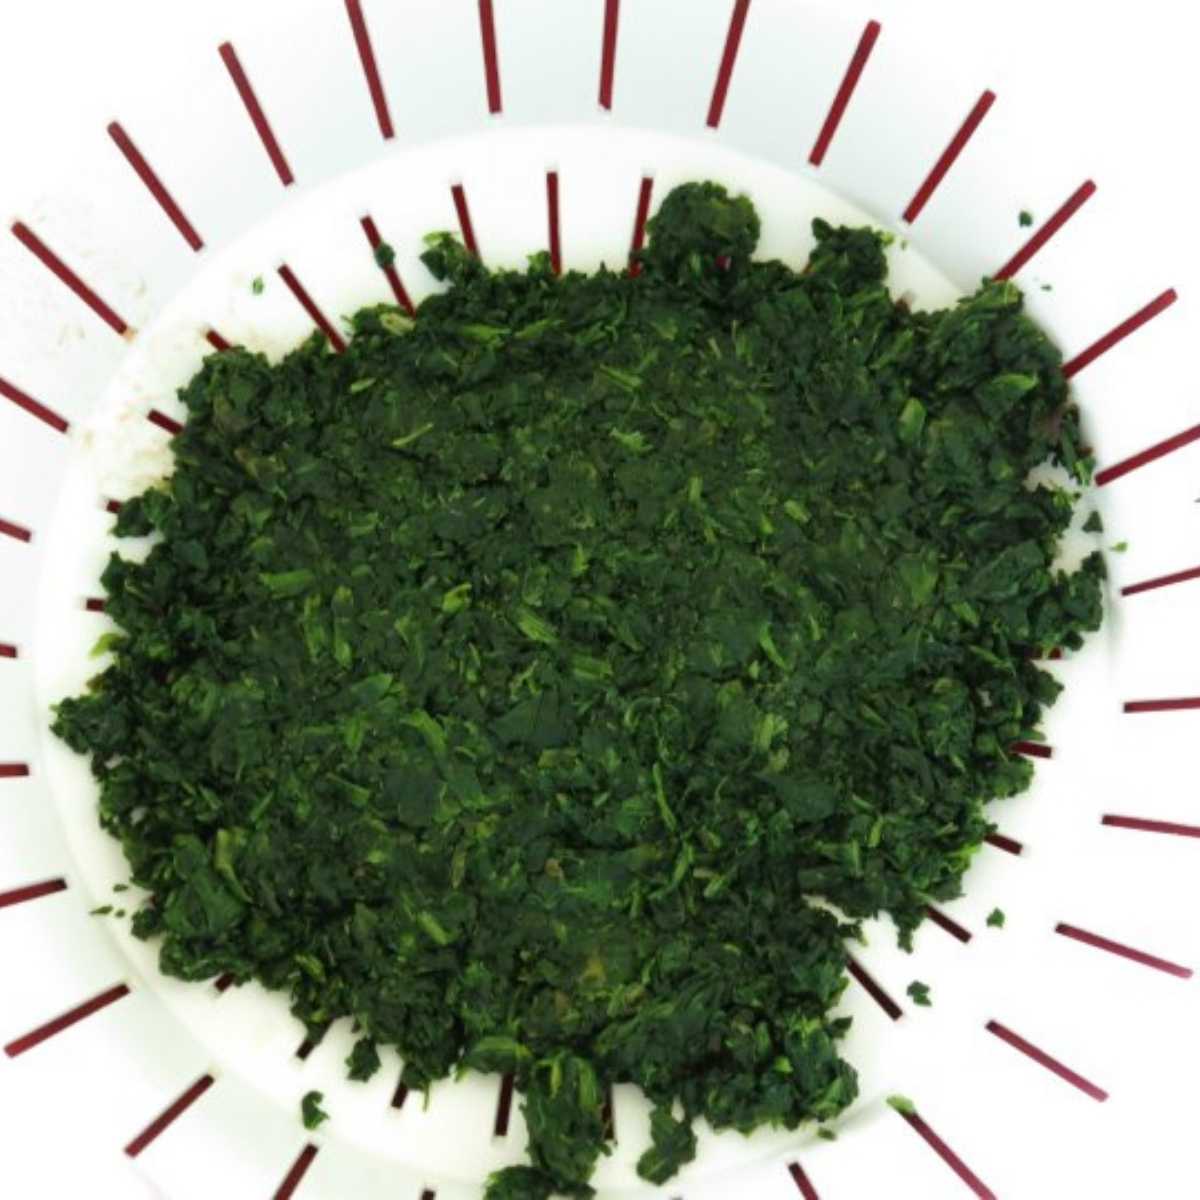 Defrosted chopped spinach in a strainer with excess liquid removed.